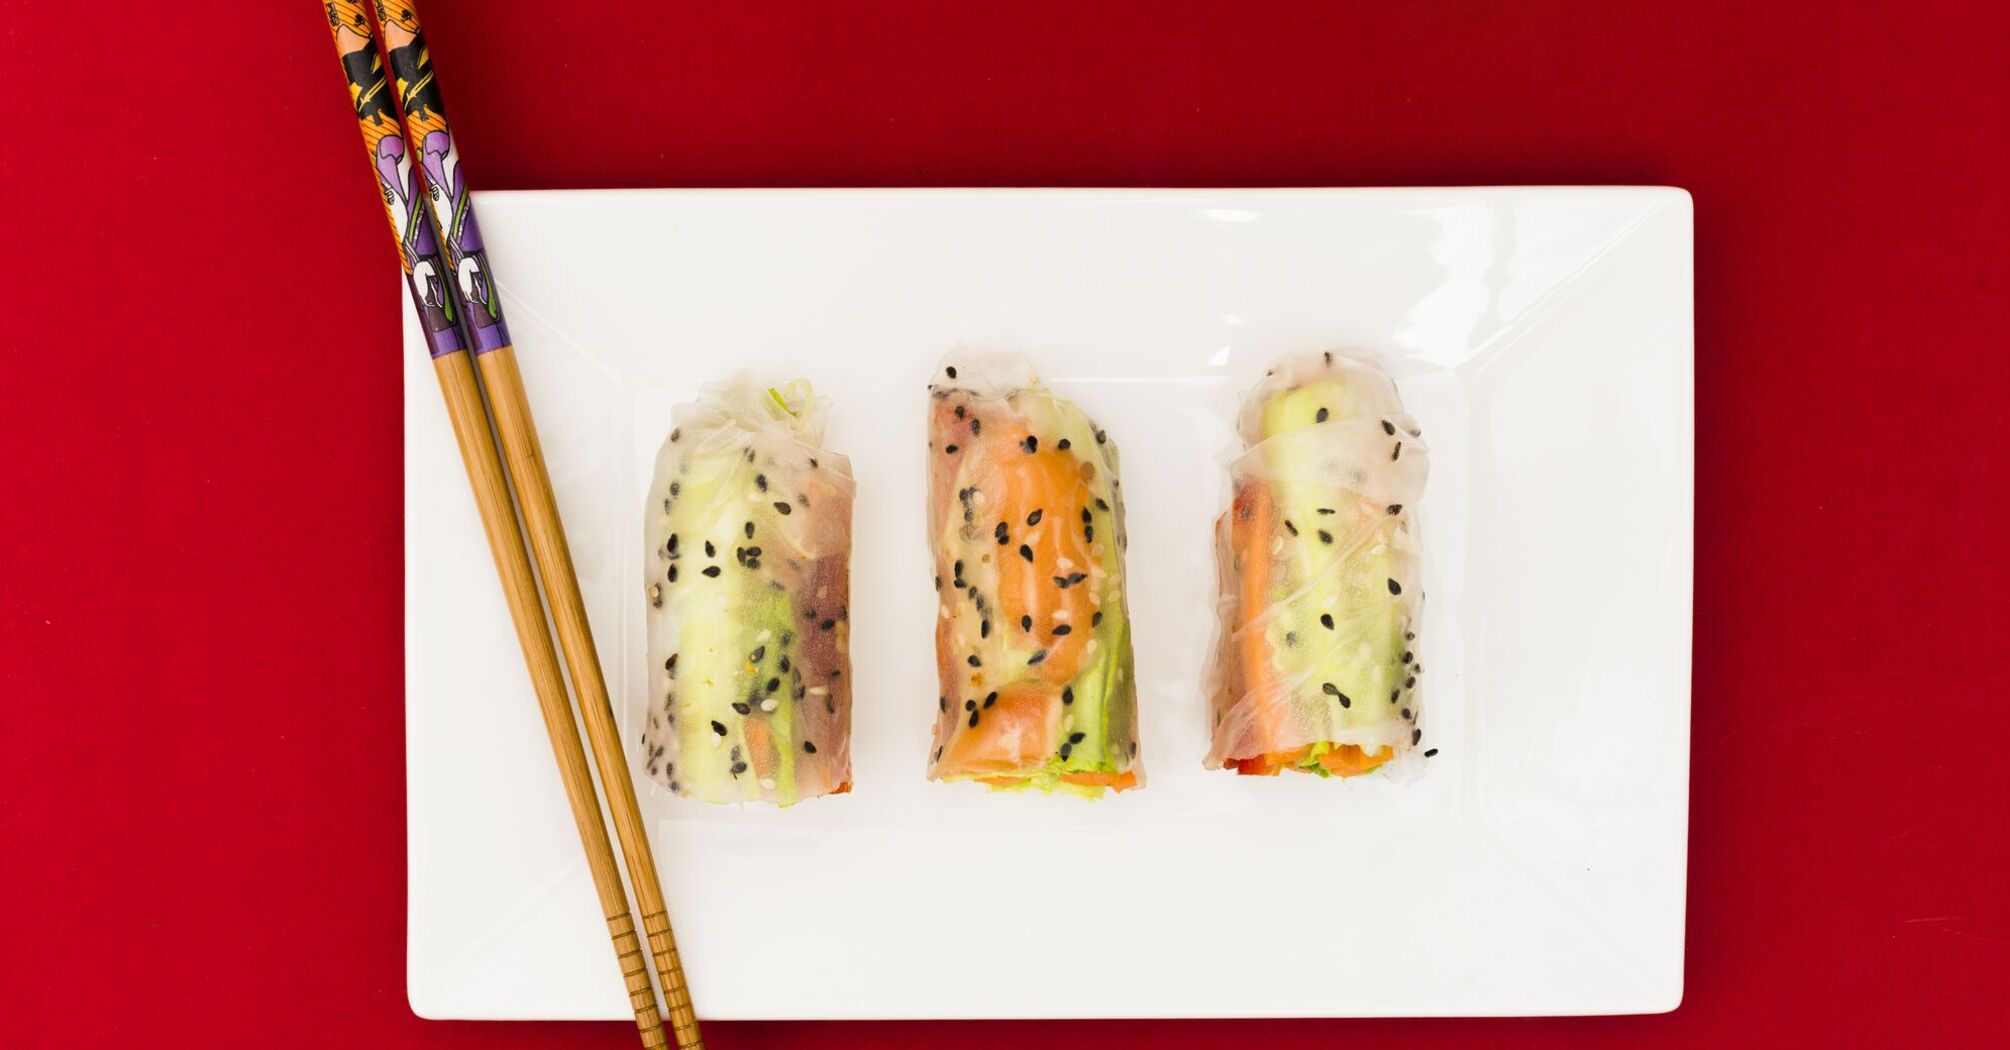 Spring rolls that won't harm your figure: how to make a real treat